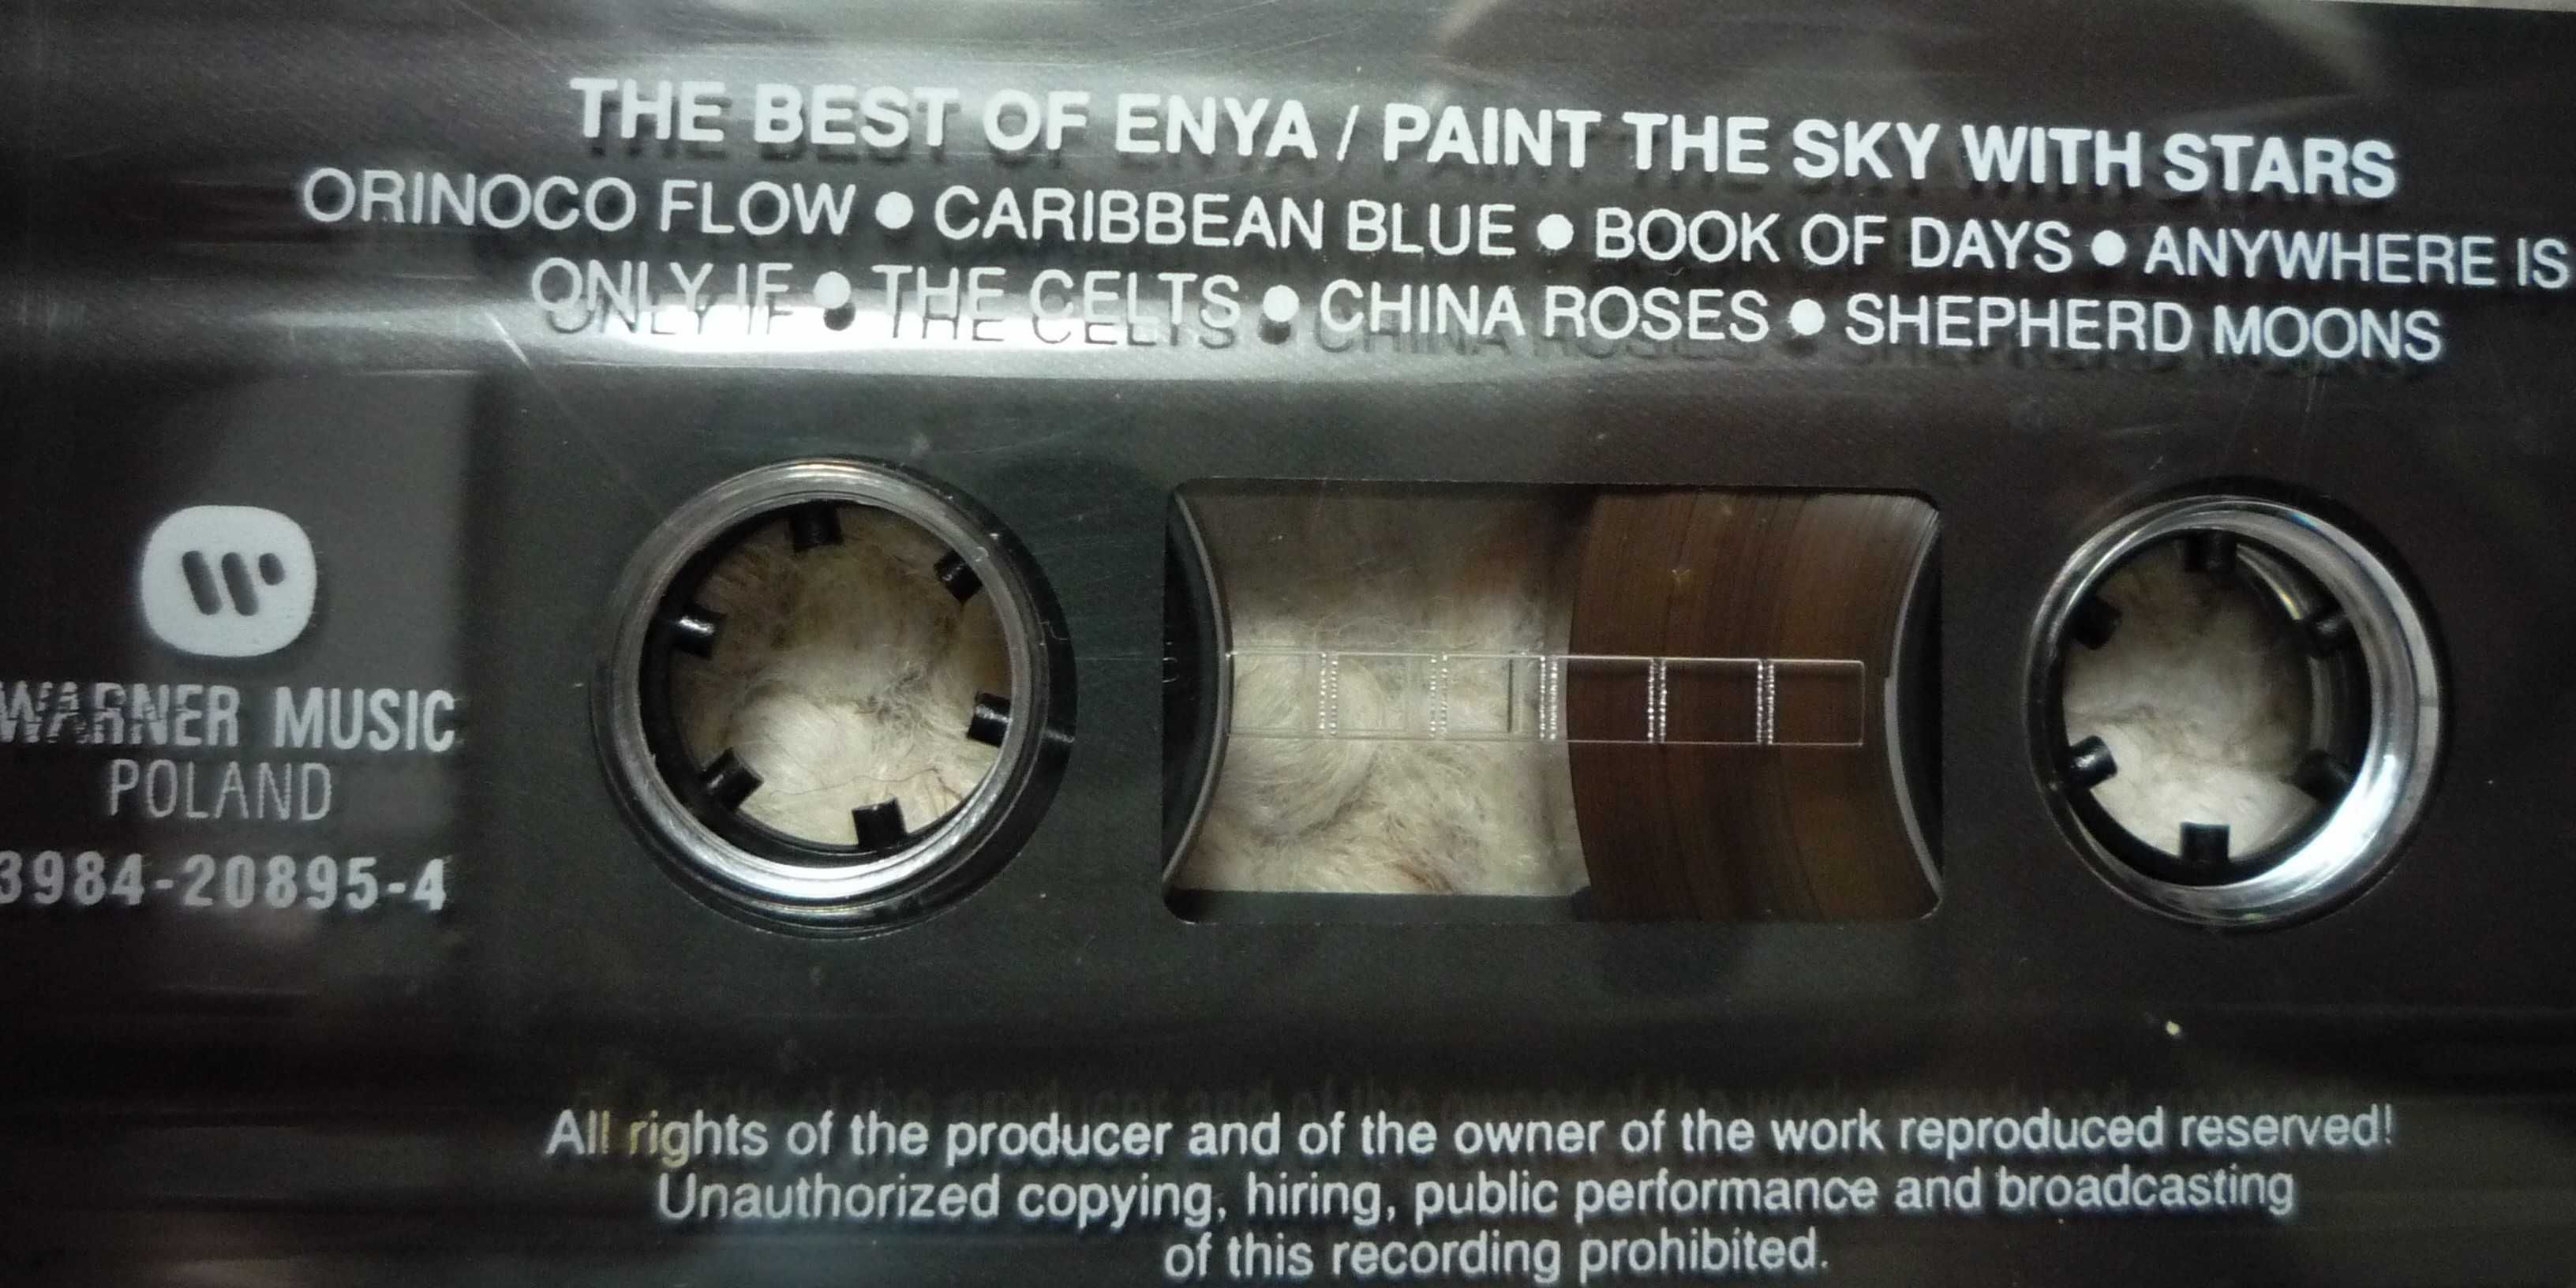 Enya – Paint the Sky with Stars - The Best of Enya